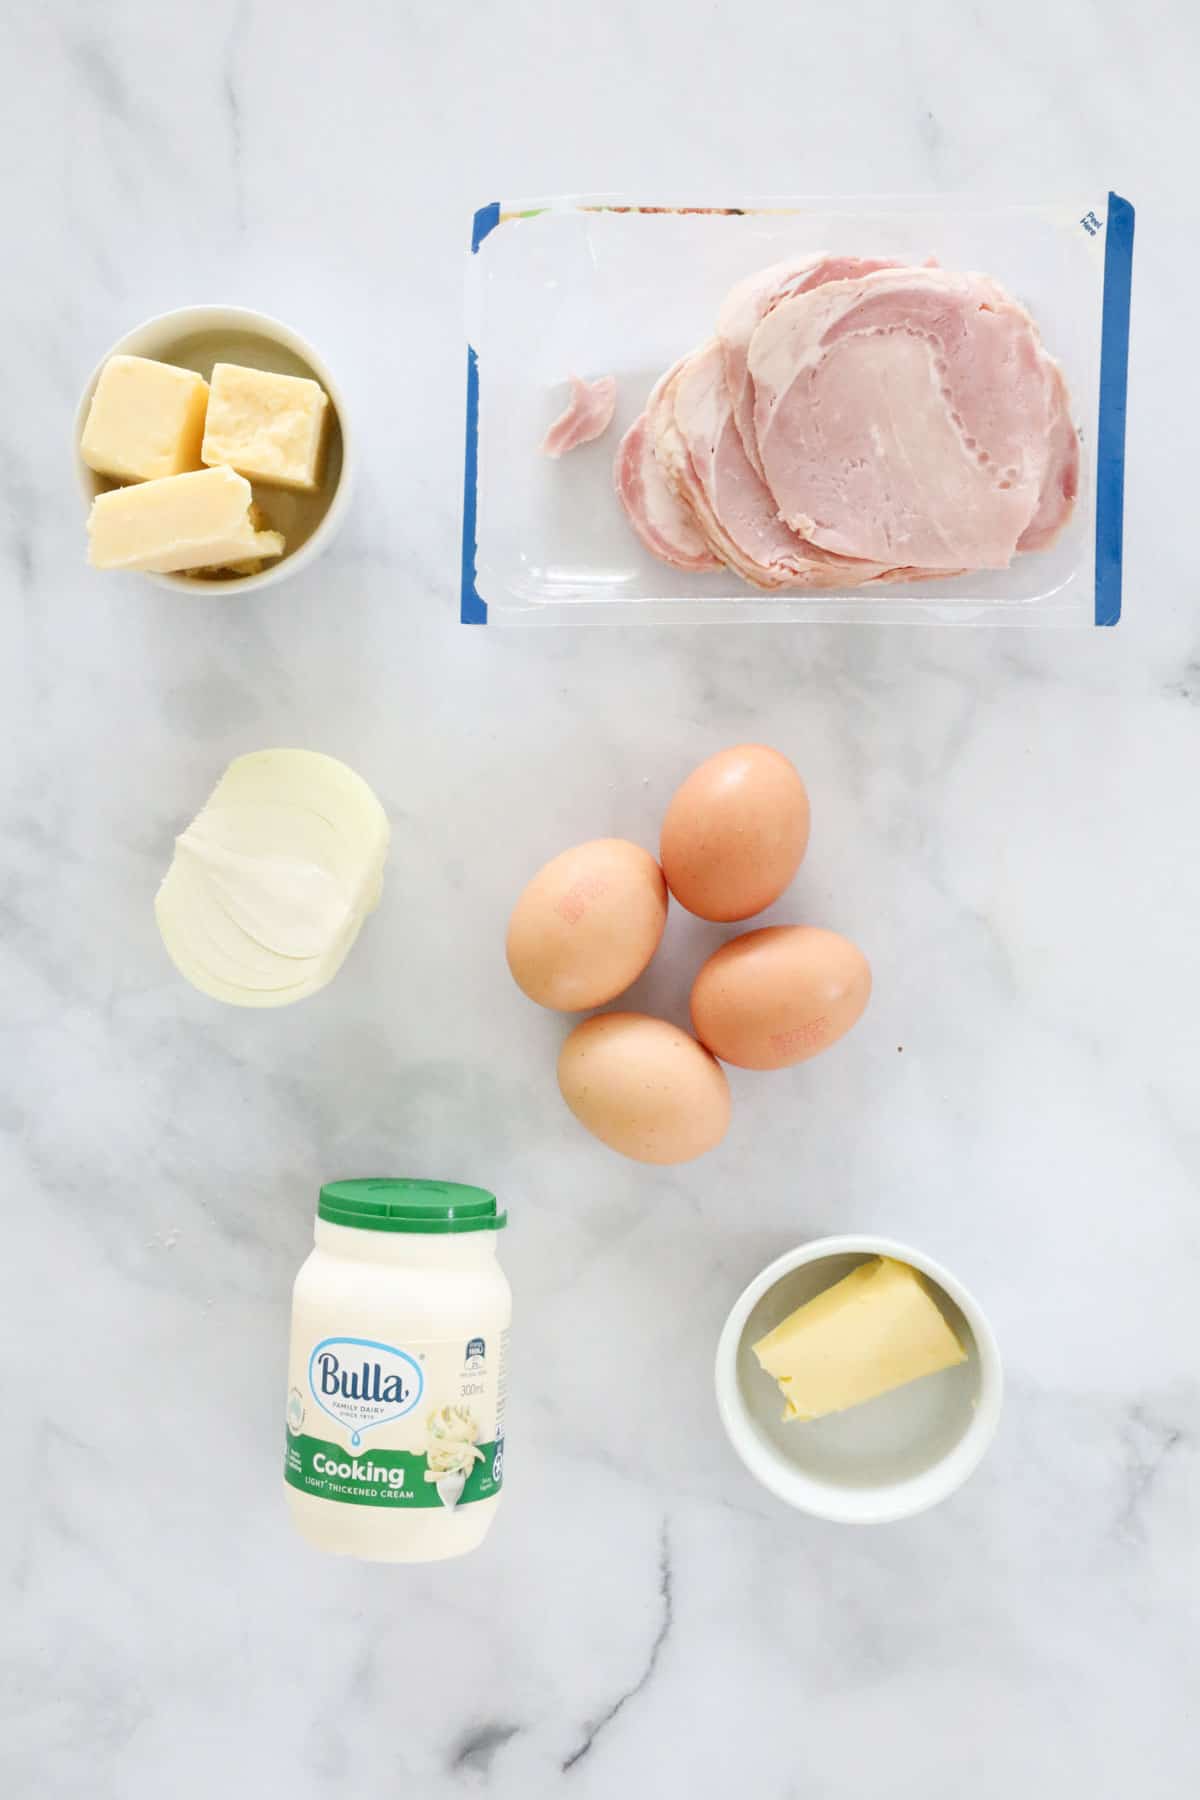 The ingredients for an egg and bacon quiche.